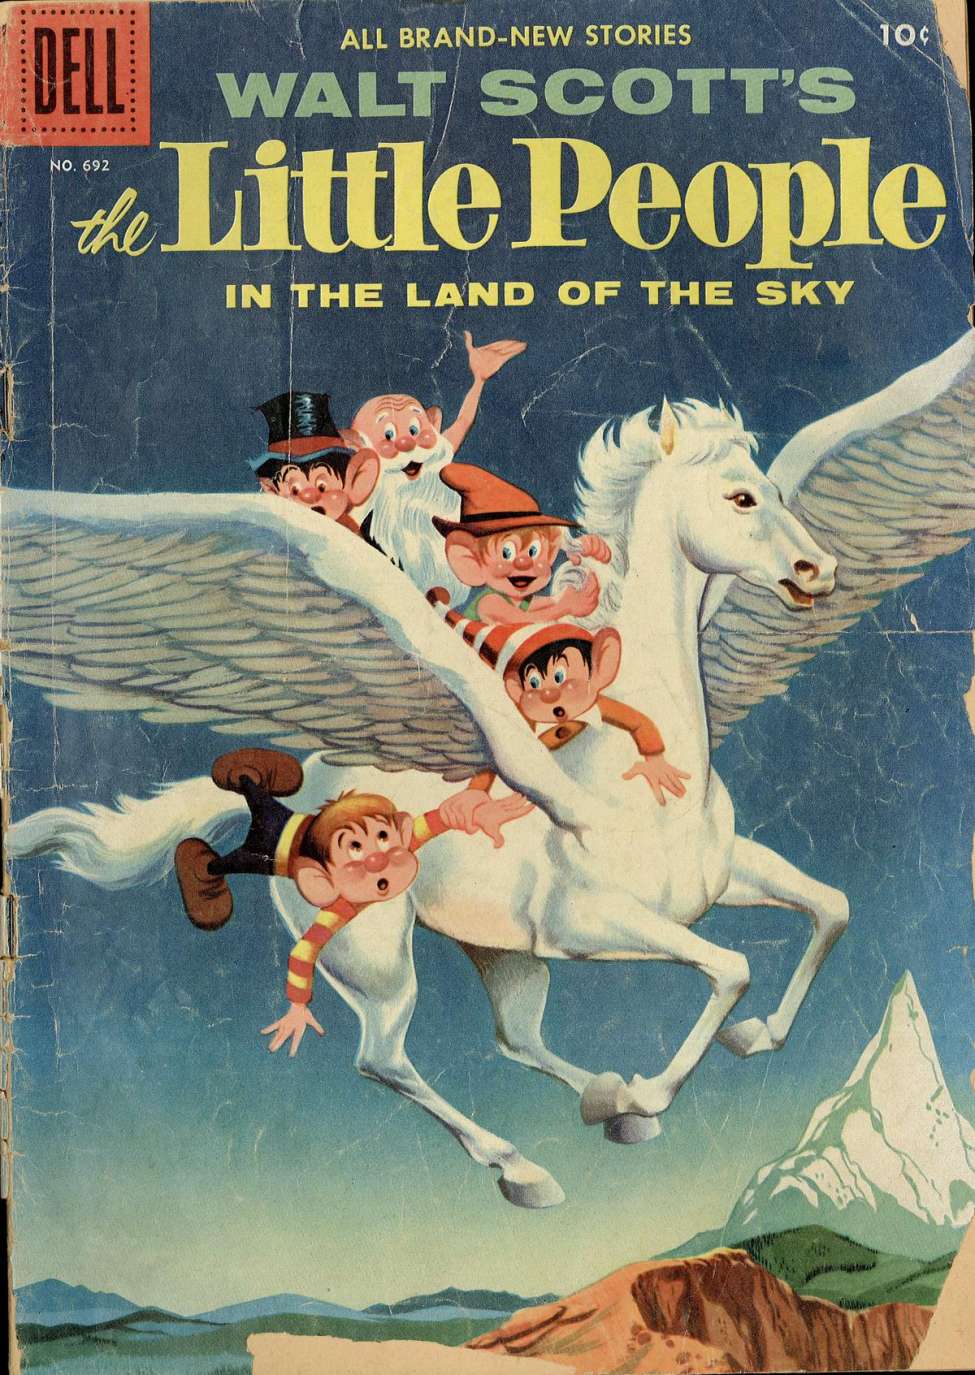 Book Cover For 0692 - Walt Scott's Little People